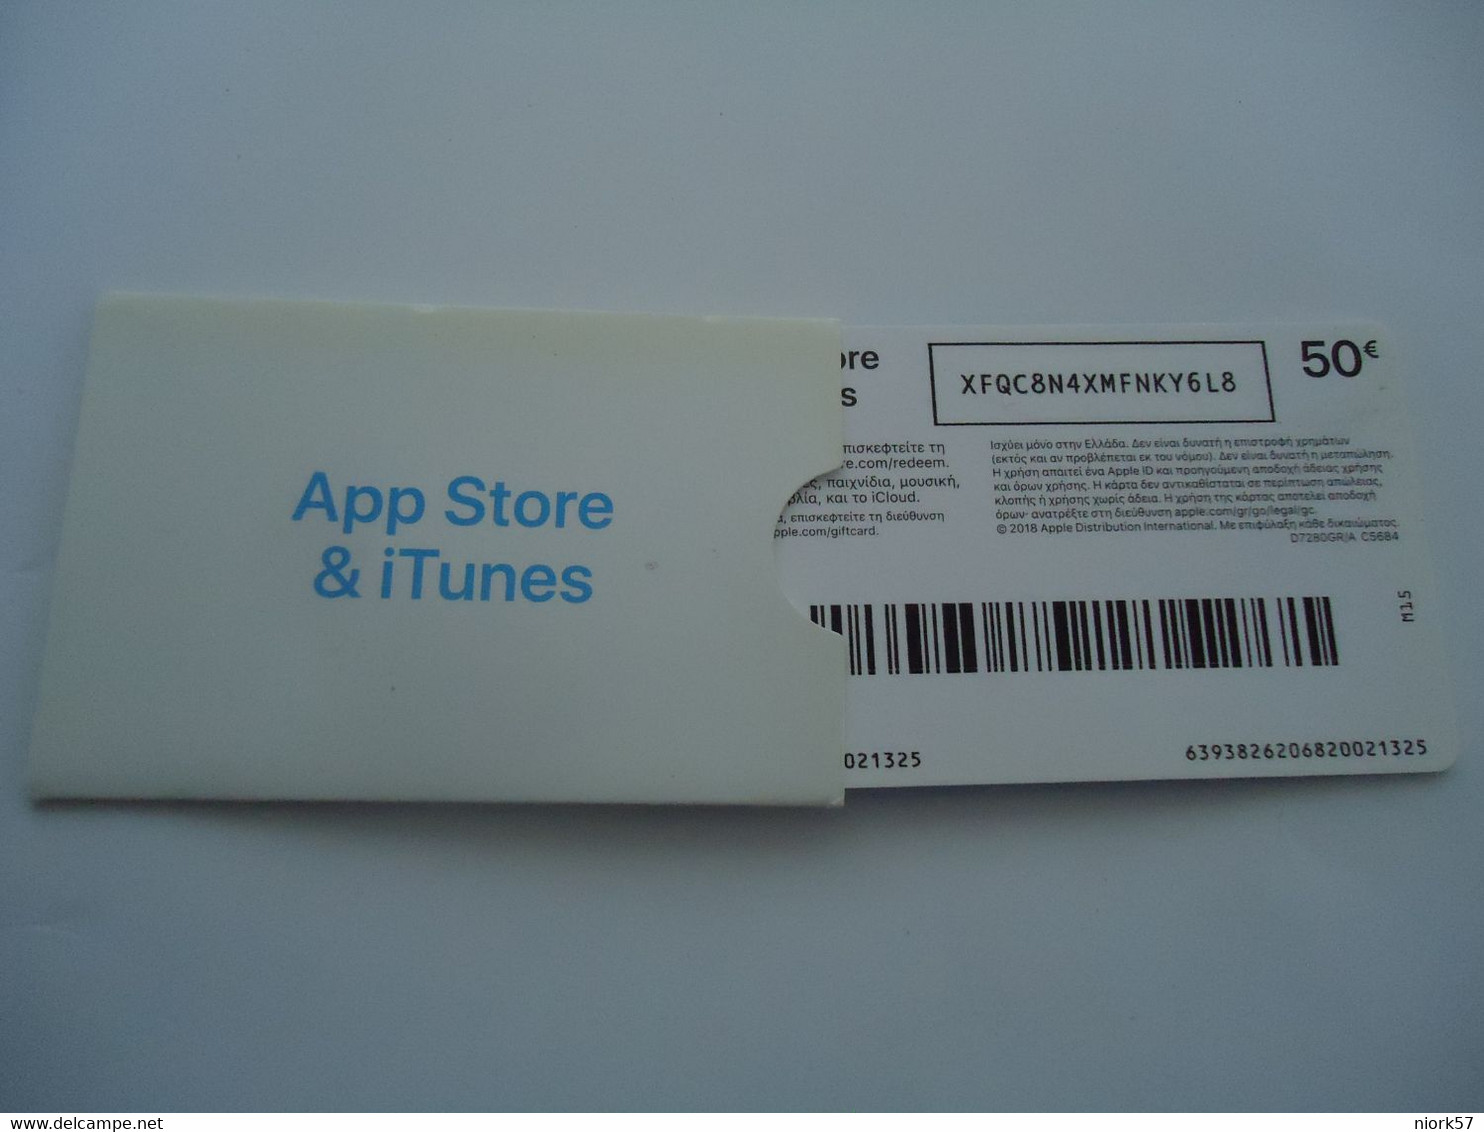 GREECE  USED PHONECARDS  OTHERS APP STORE & ITUNES UNIT 15 EURO  WITH FOLDER - Grèce